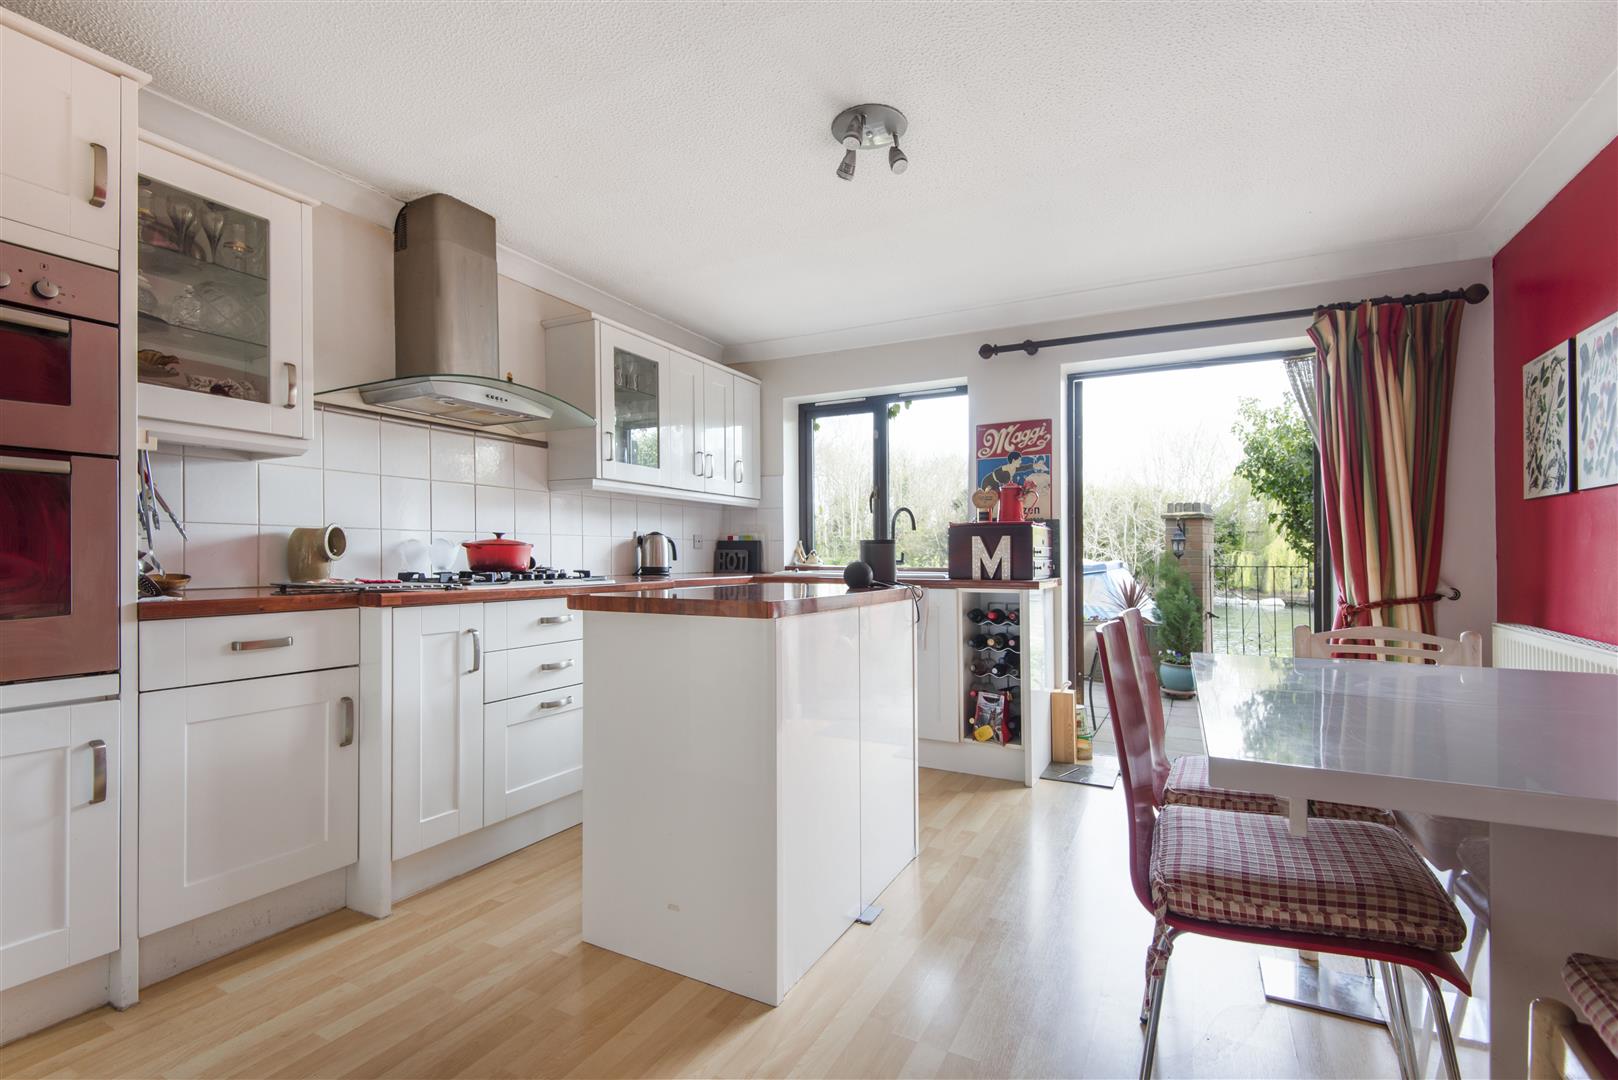 Lynmouth Road Reading house for sale in Reading